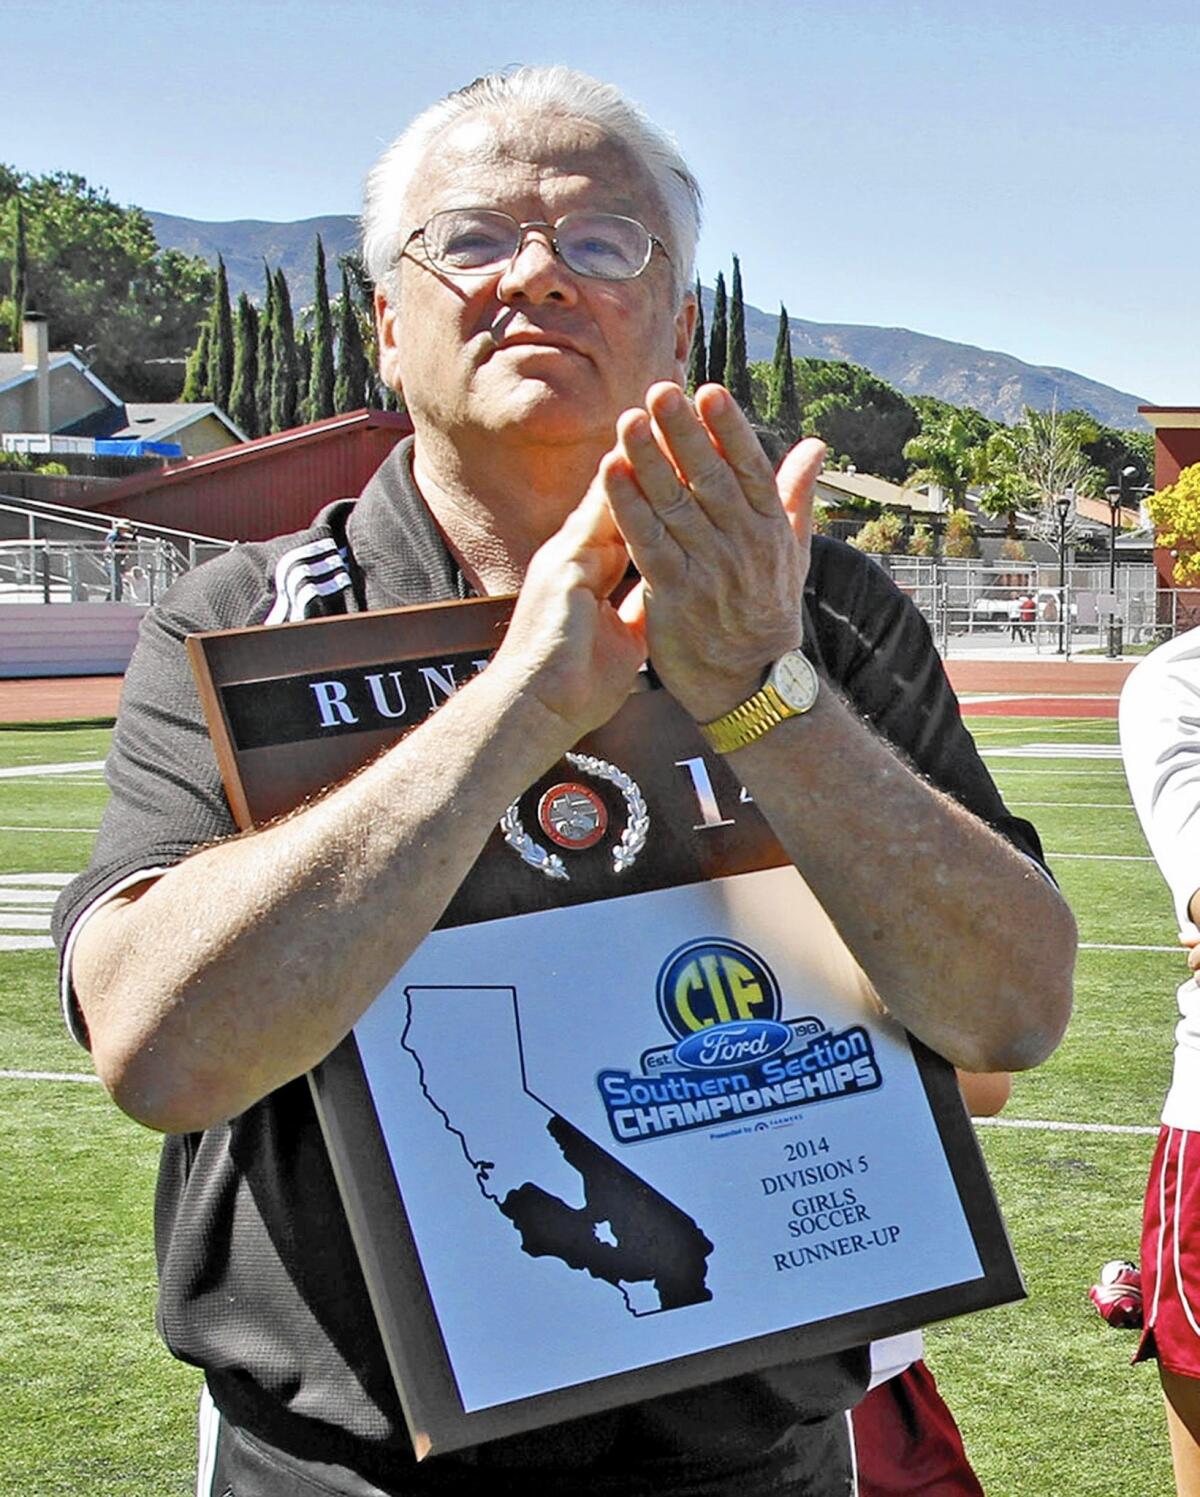 La Cañada High School soccer coach Louie Bilowitz holds the runner-up trophy after playing in the CIF SS Girls Div 5 final match vs. St. Margaret's High School at Corona High School in Corona, Ca., on Saturday, March 8, 2014.